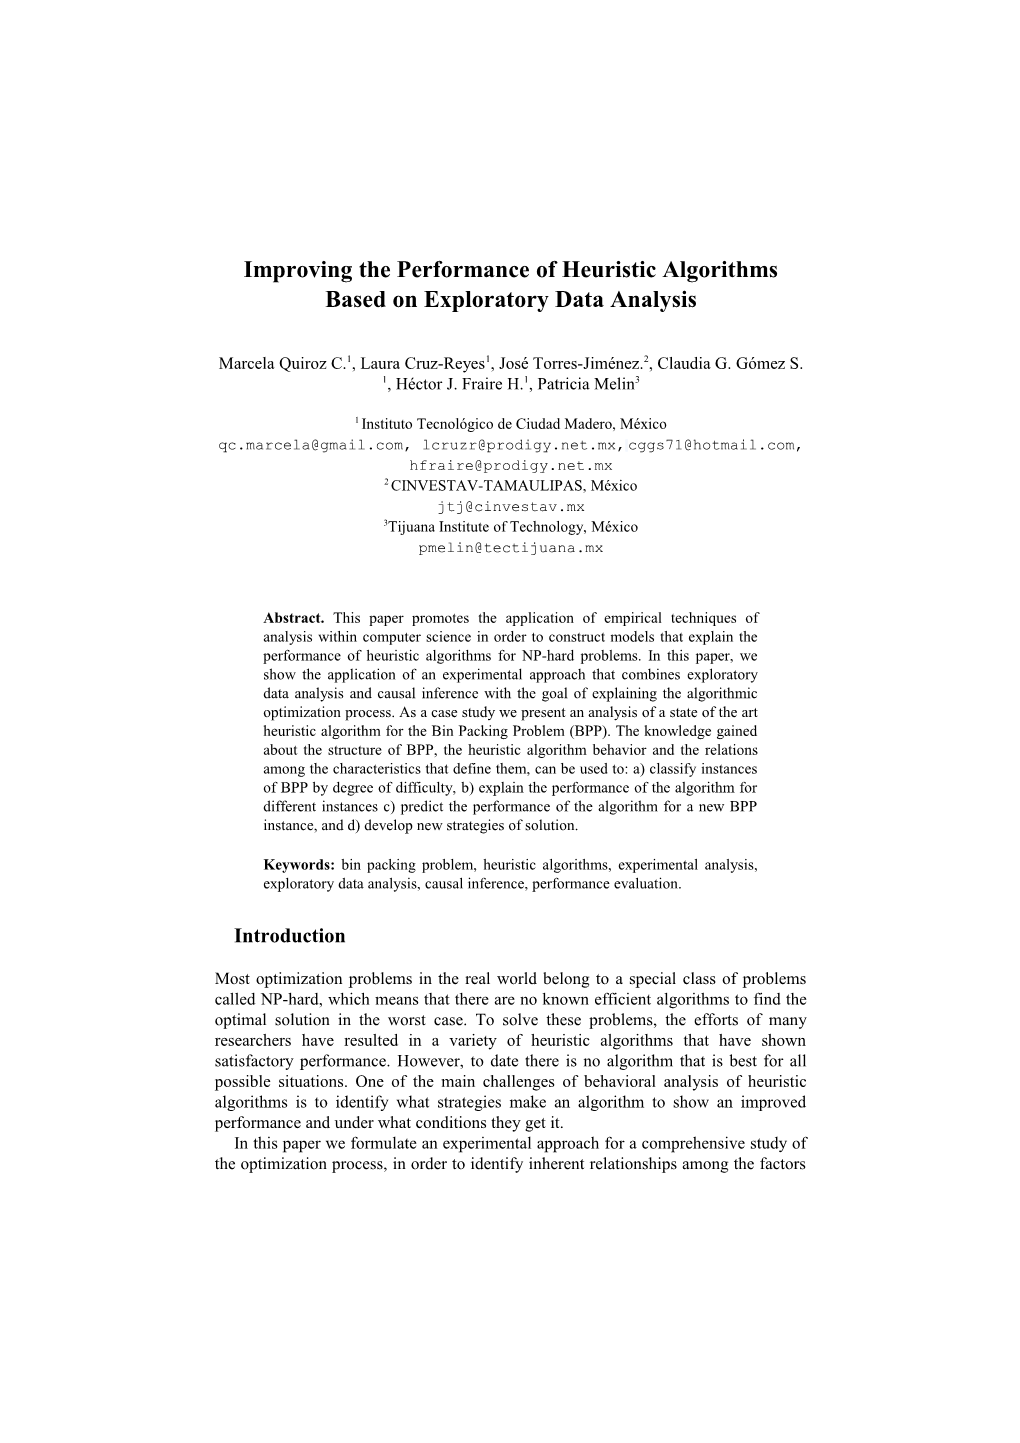 Improving the Performance of Heuristic Algorithms Based on Exploratory Data Analysis